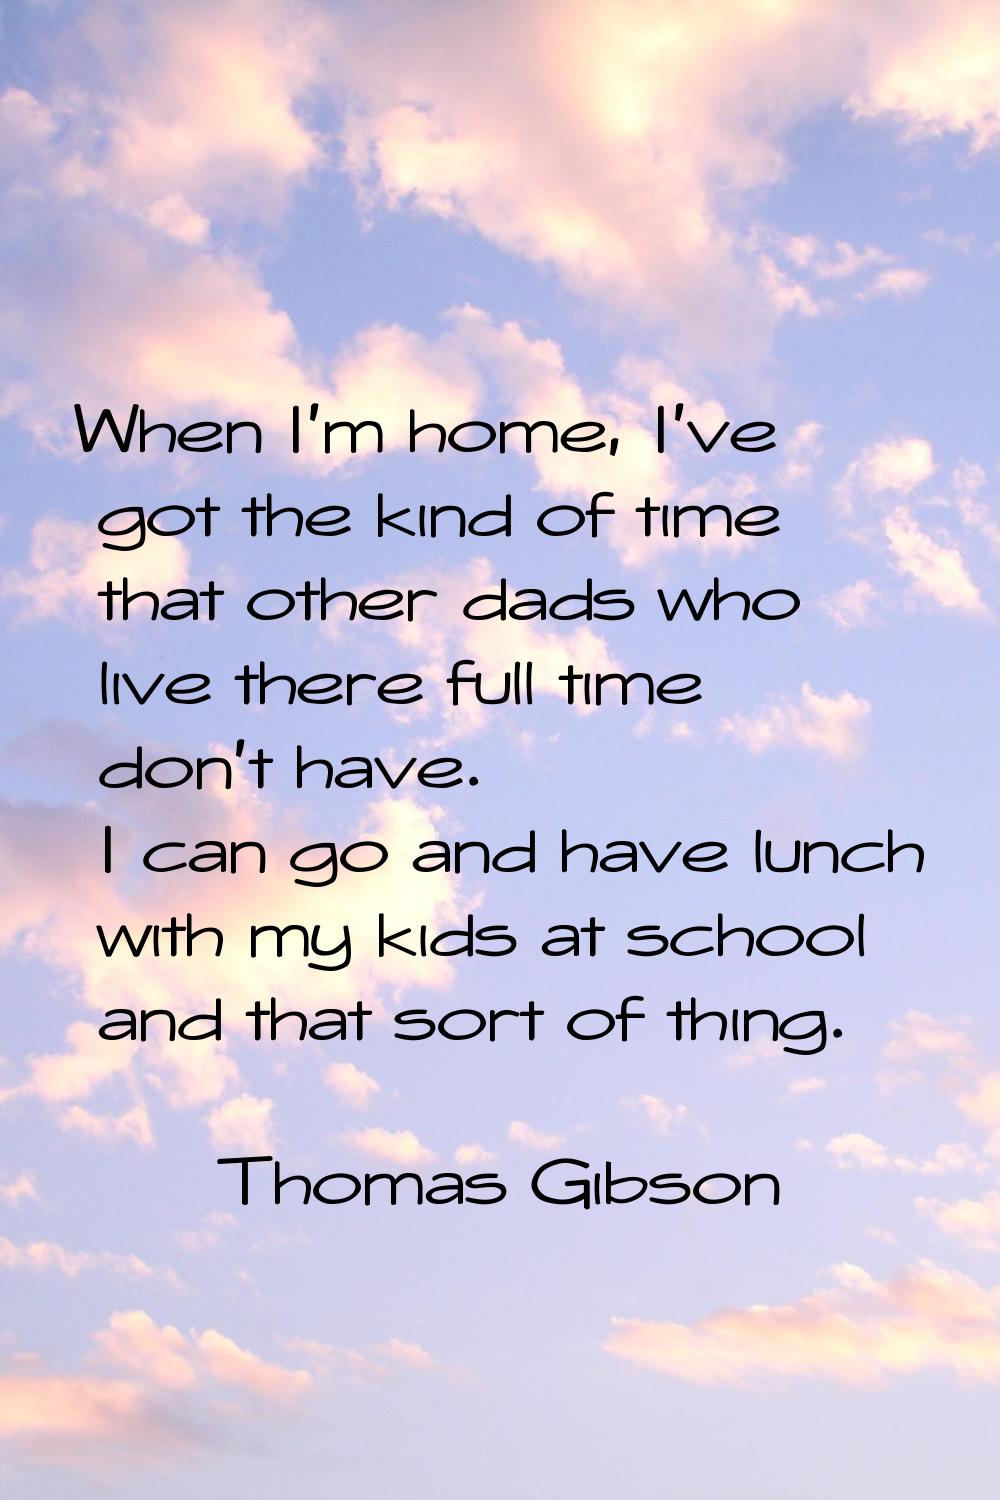 When I'm home, I've got the kind of time that other dads who live there full time don't have. I can